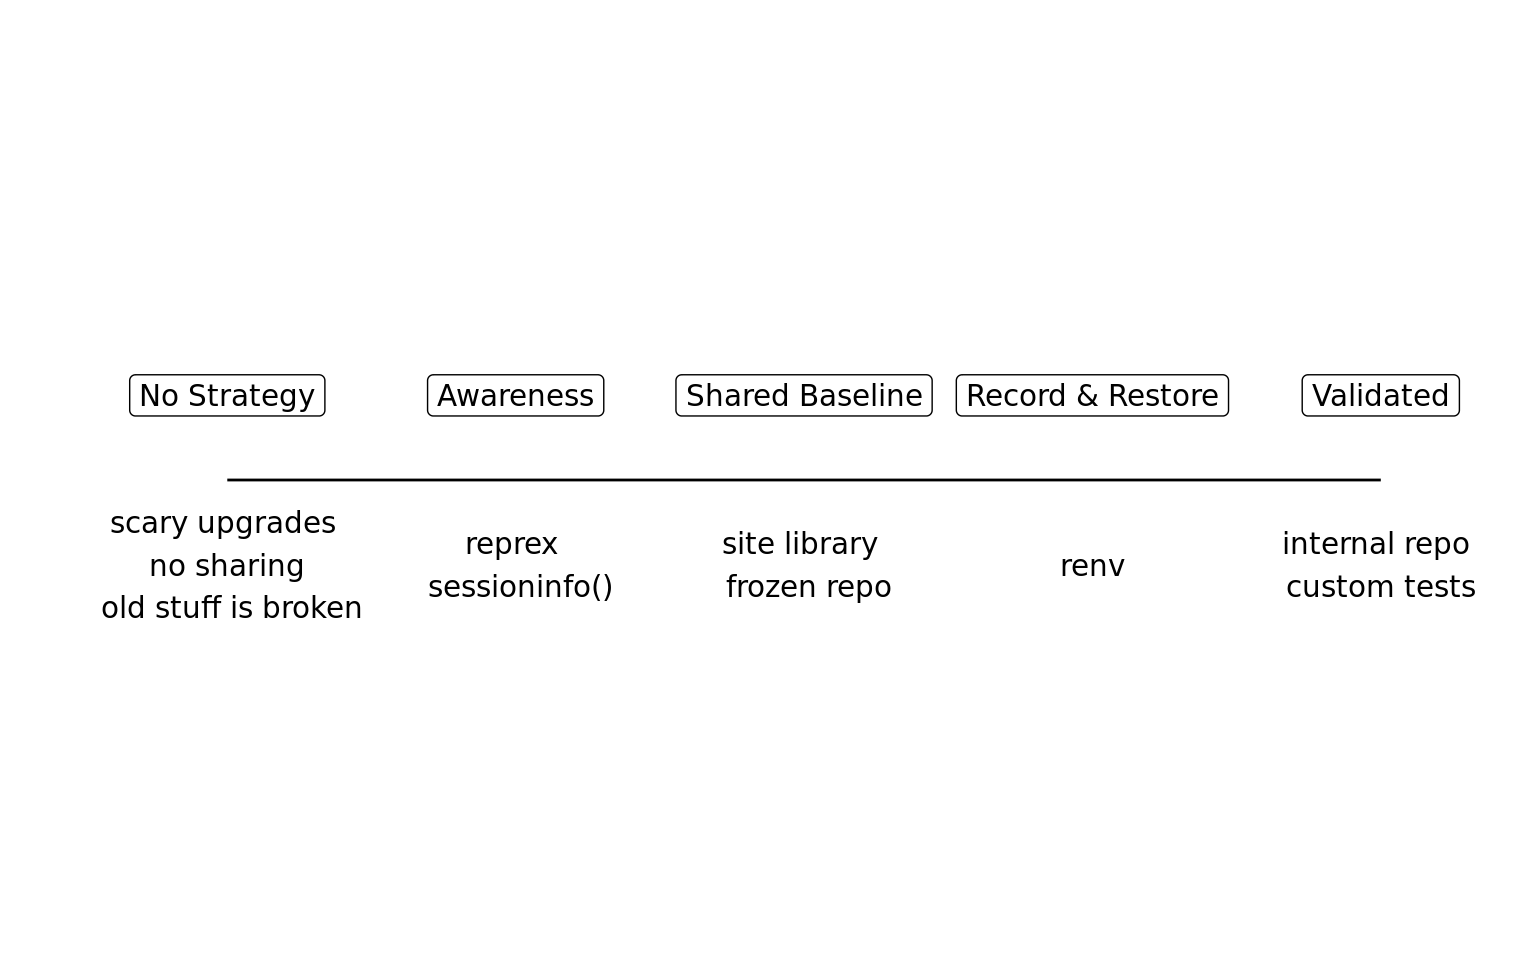 Spectrum of reproducibility strategies. Far left: No strategy - upgrades are scary, no sharing, and old stuff is broken. Then Awareness - reprex, sessionInfo; Midpoint is Shared Baseline - having a site library and frozen repo; Then Record & Restore - using renv; and far right is Validated - internal repository, custom tests.